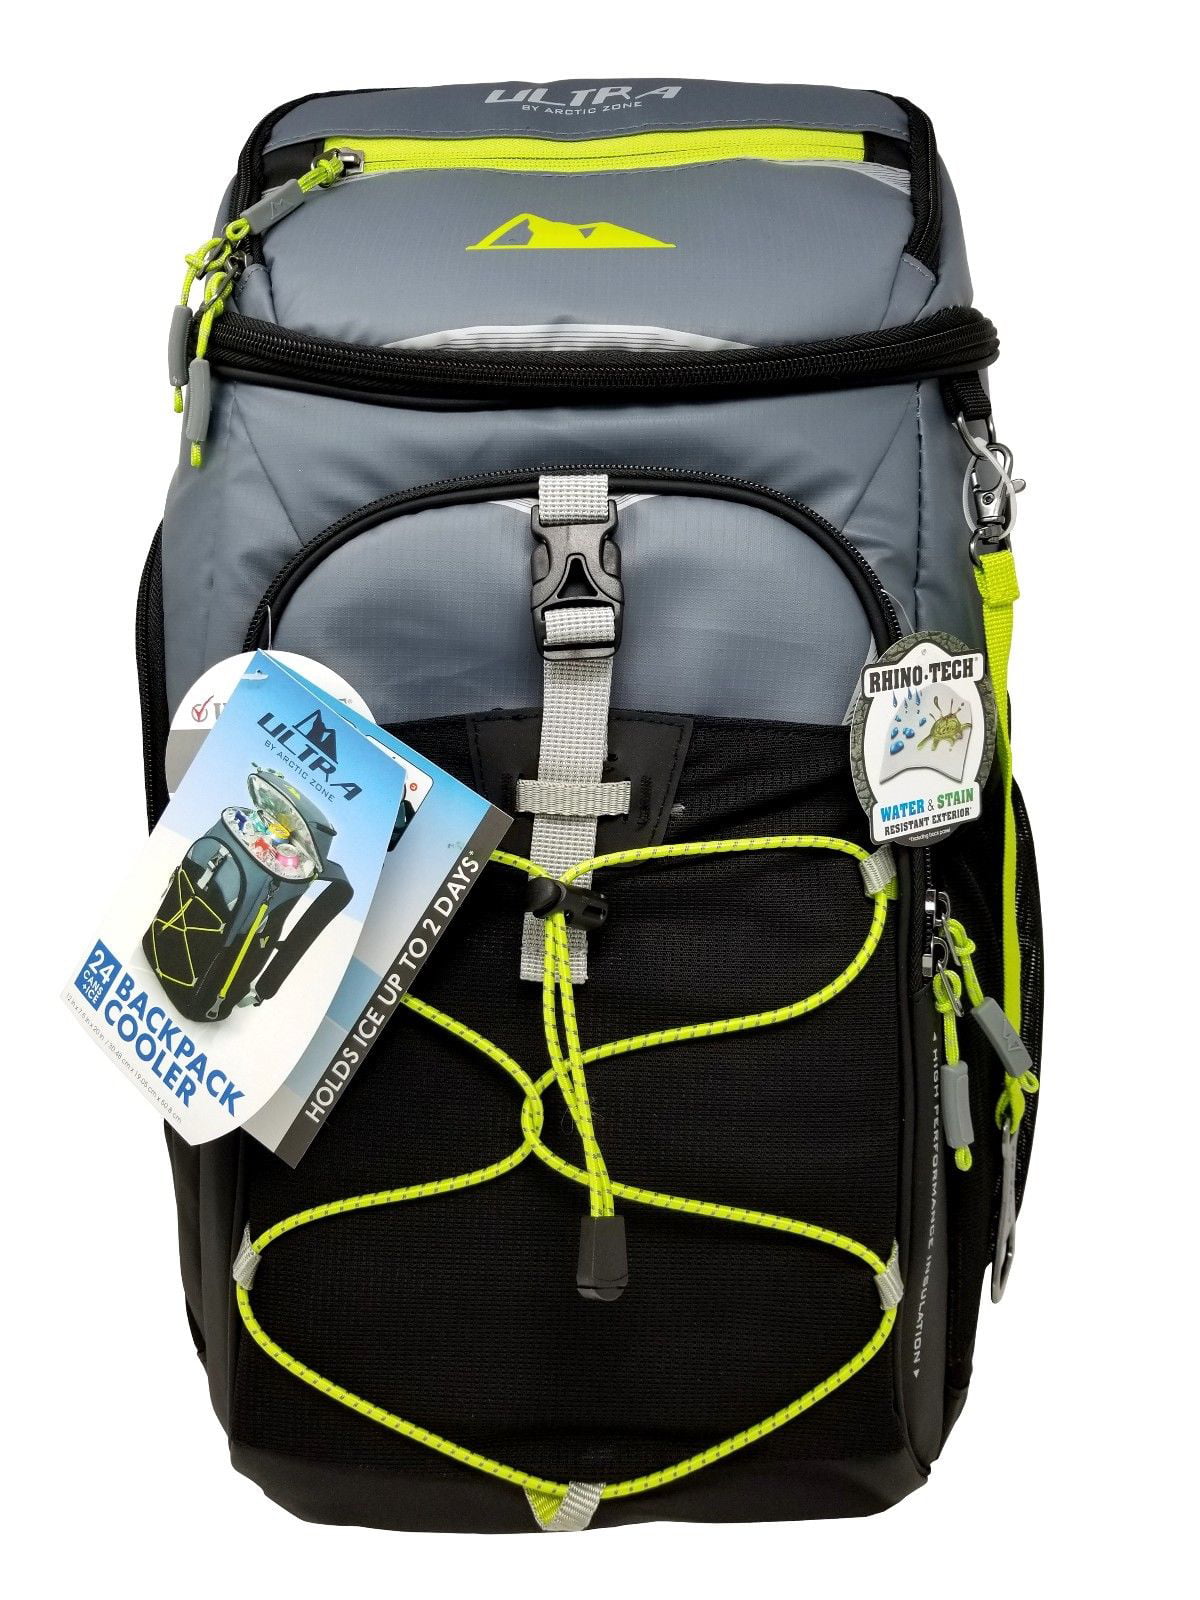 Arctic Zone Ultra Backpack Cooler | lupon.gov.ph